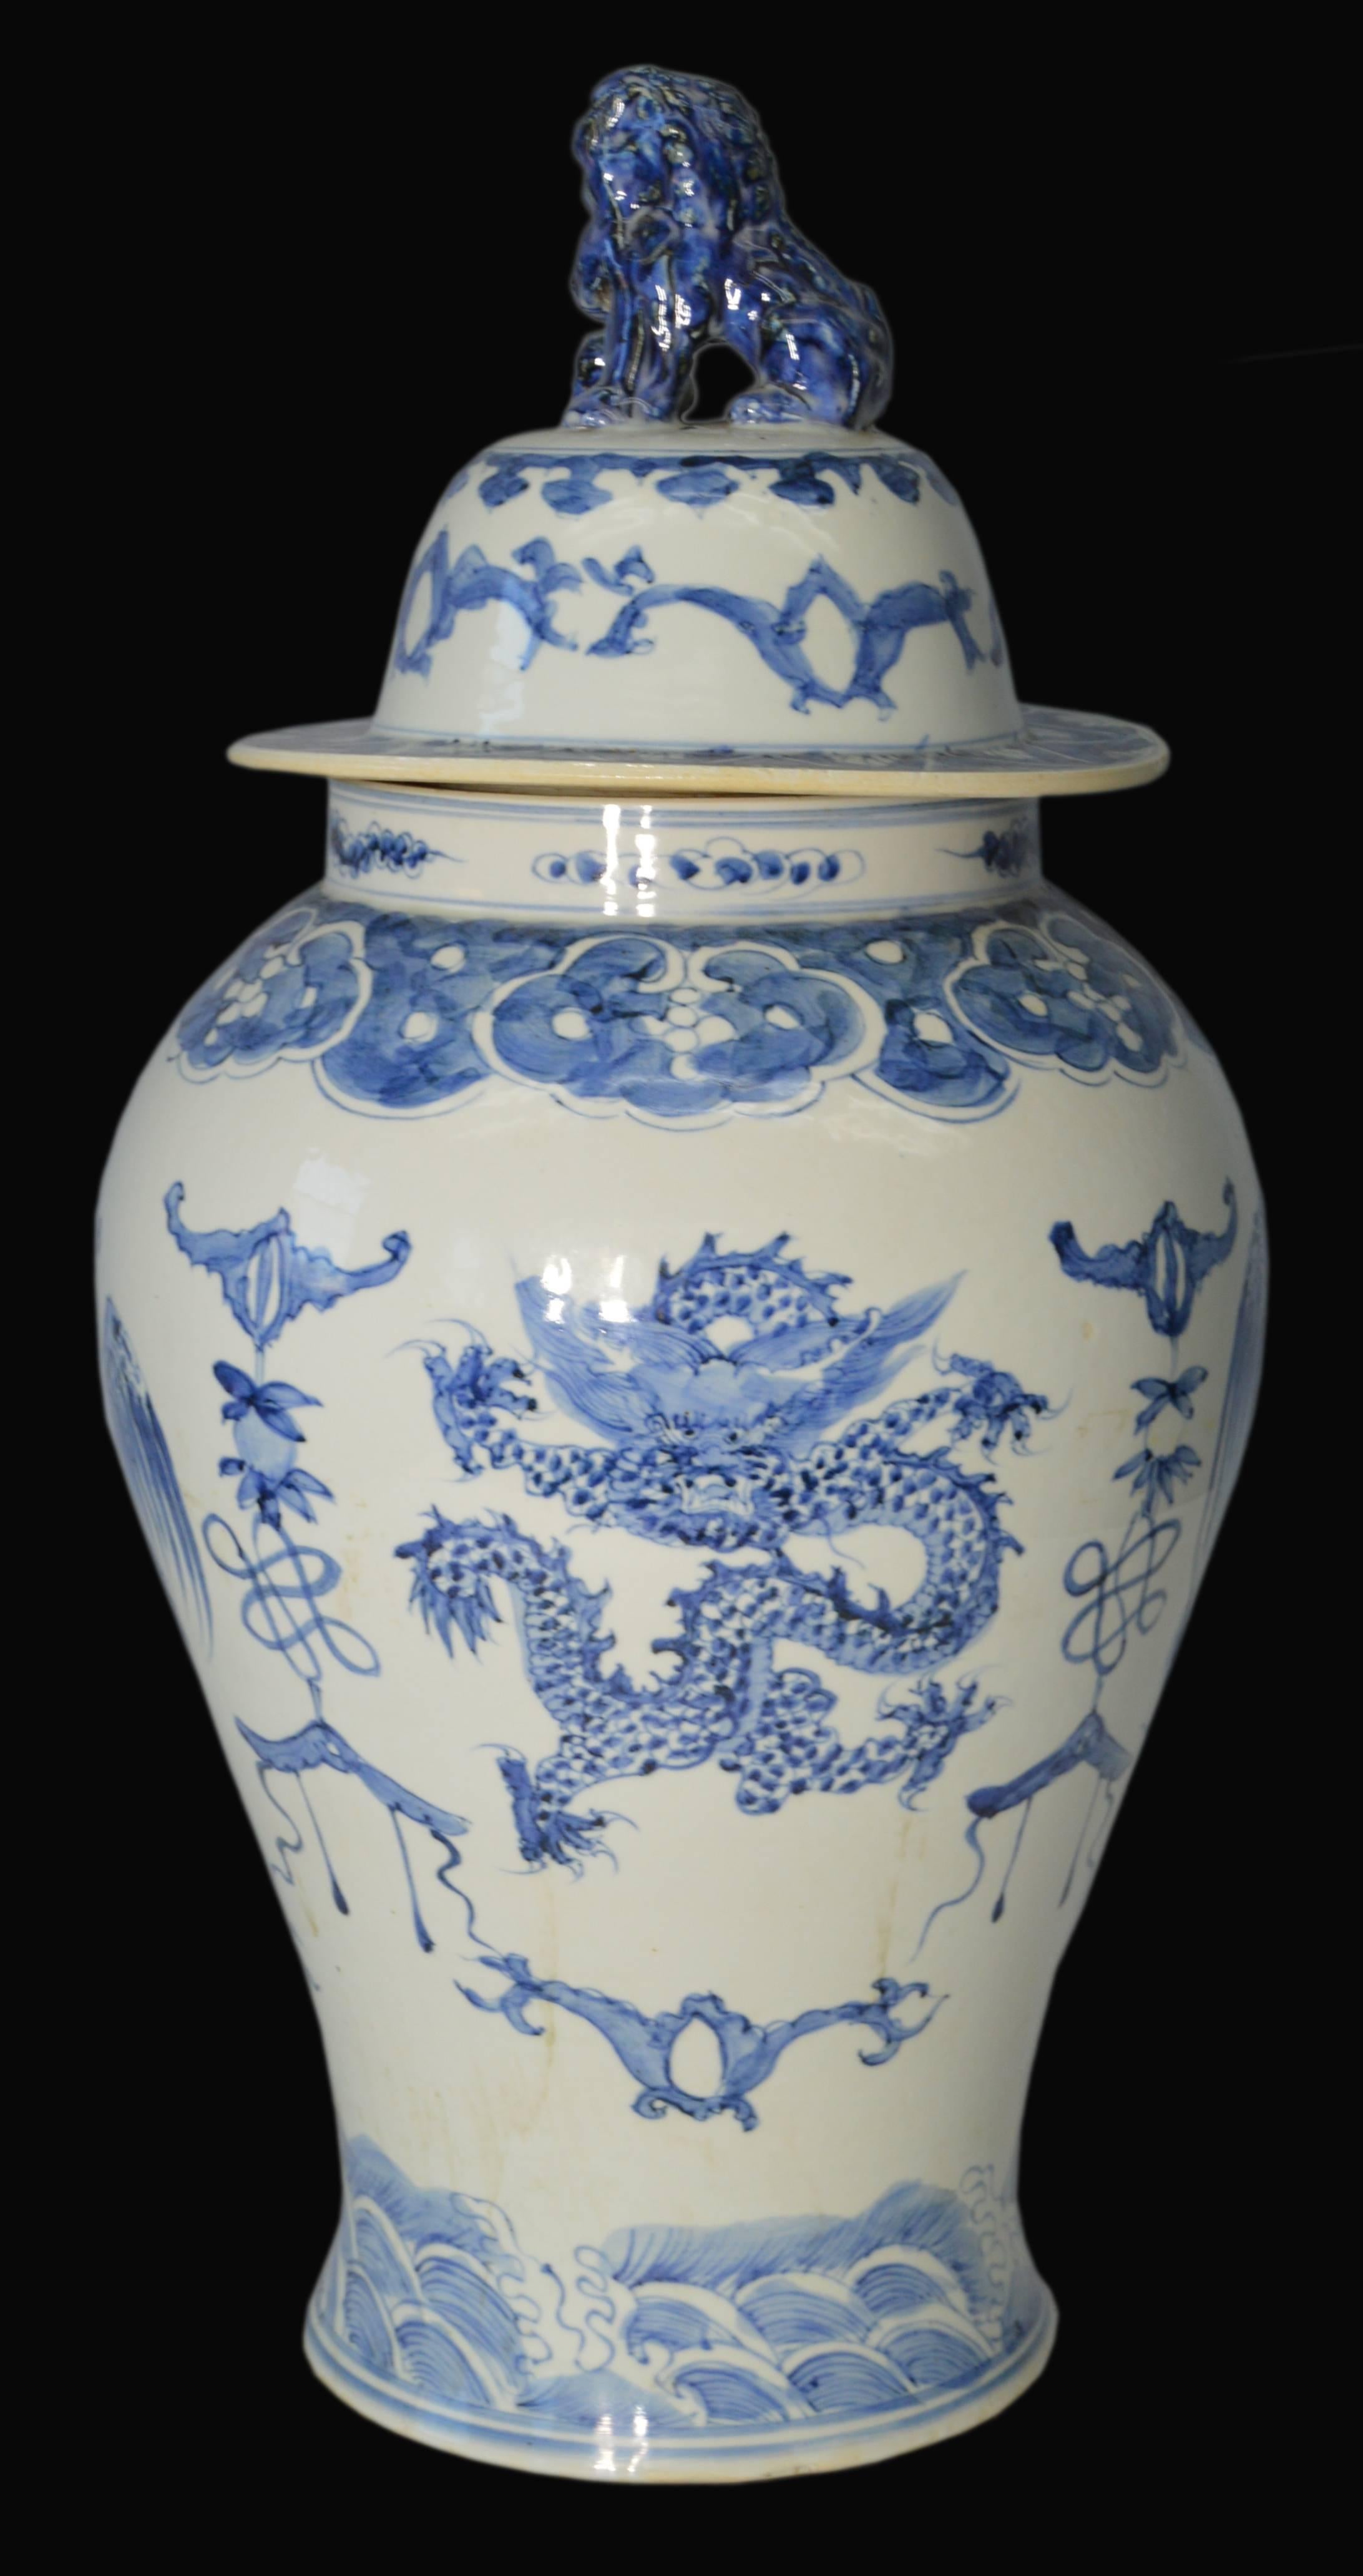 20th Century Chinese Vintage Hand-Painted Blue and White Porcelain Vase with Dragon